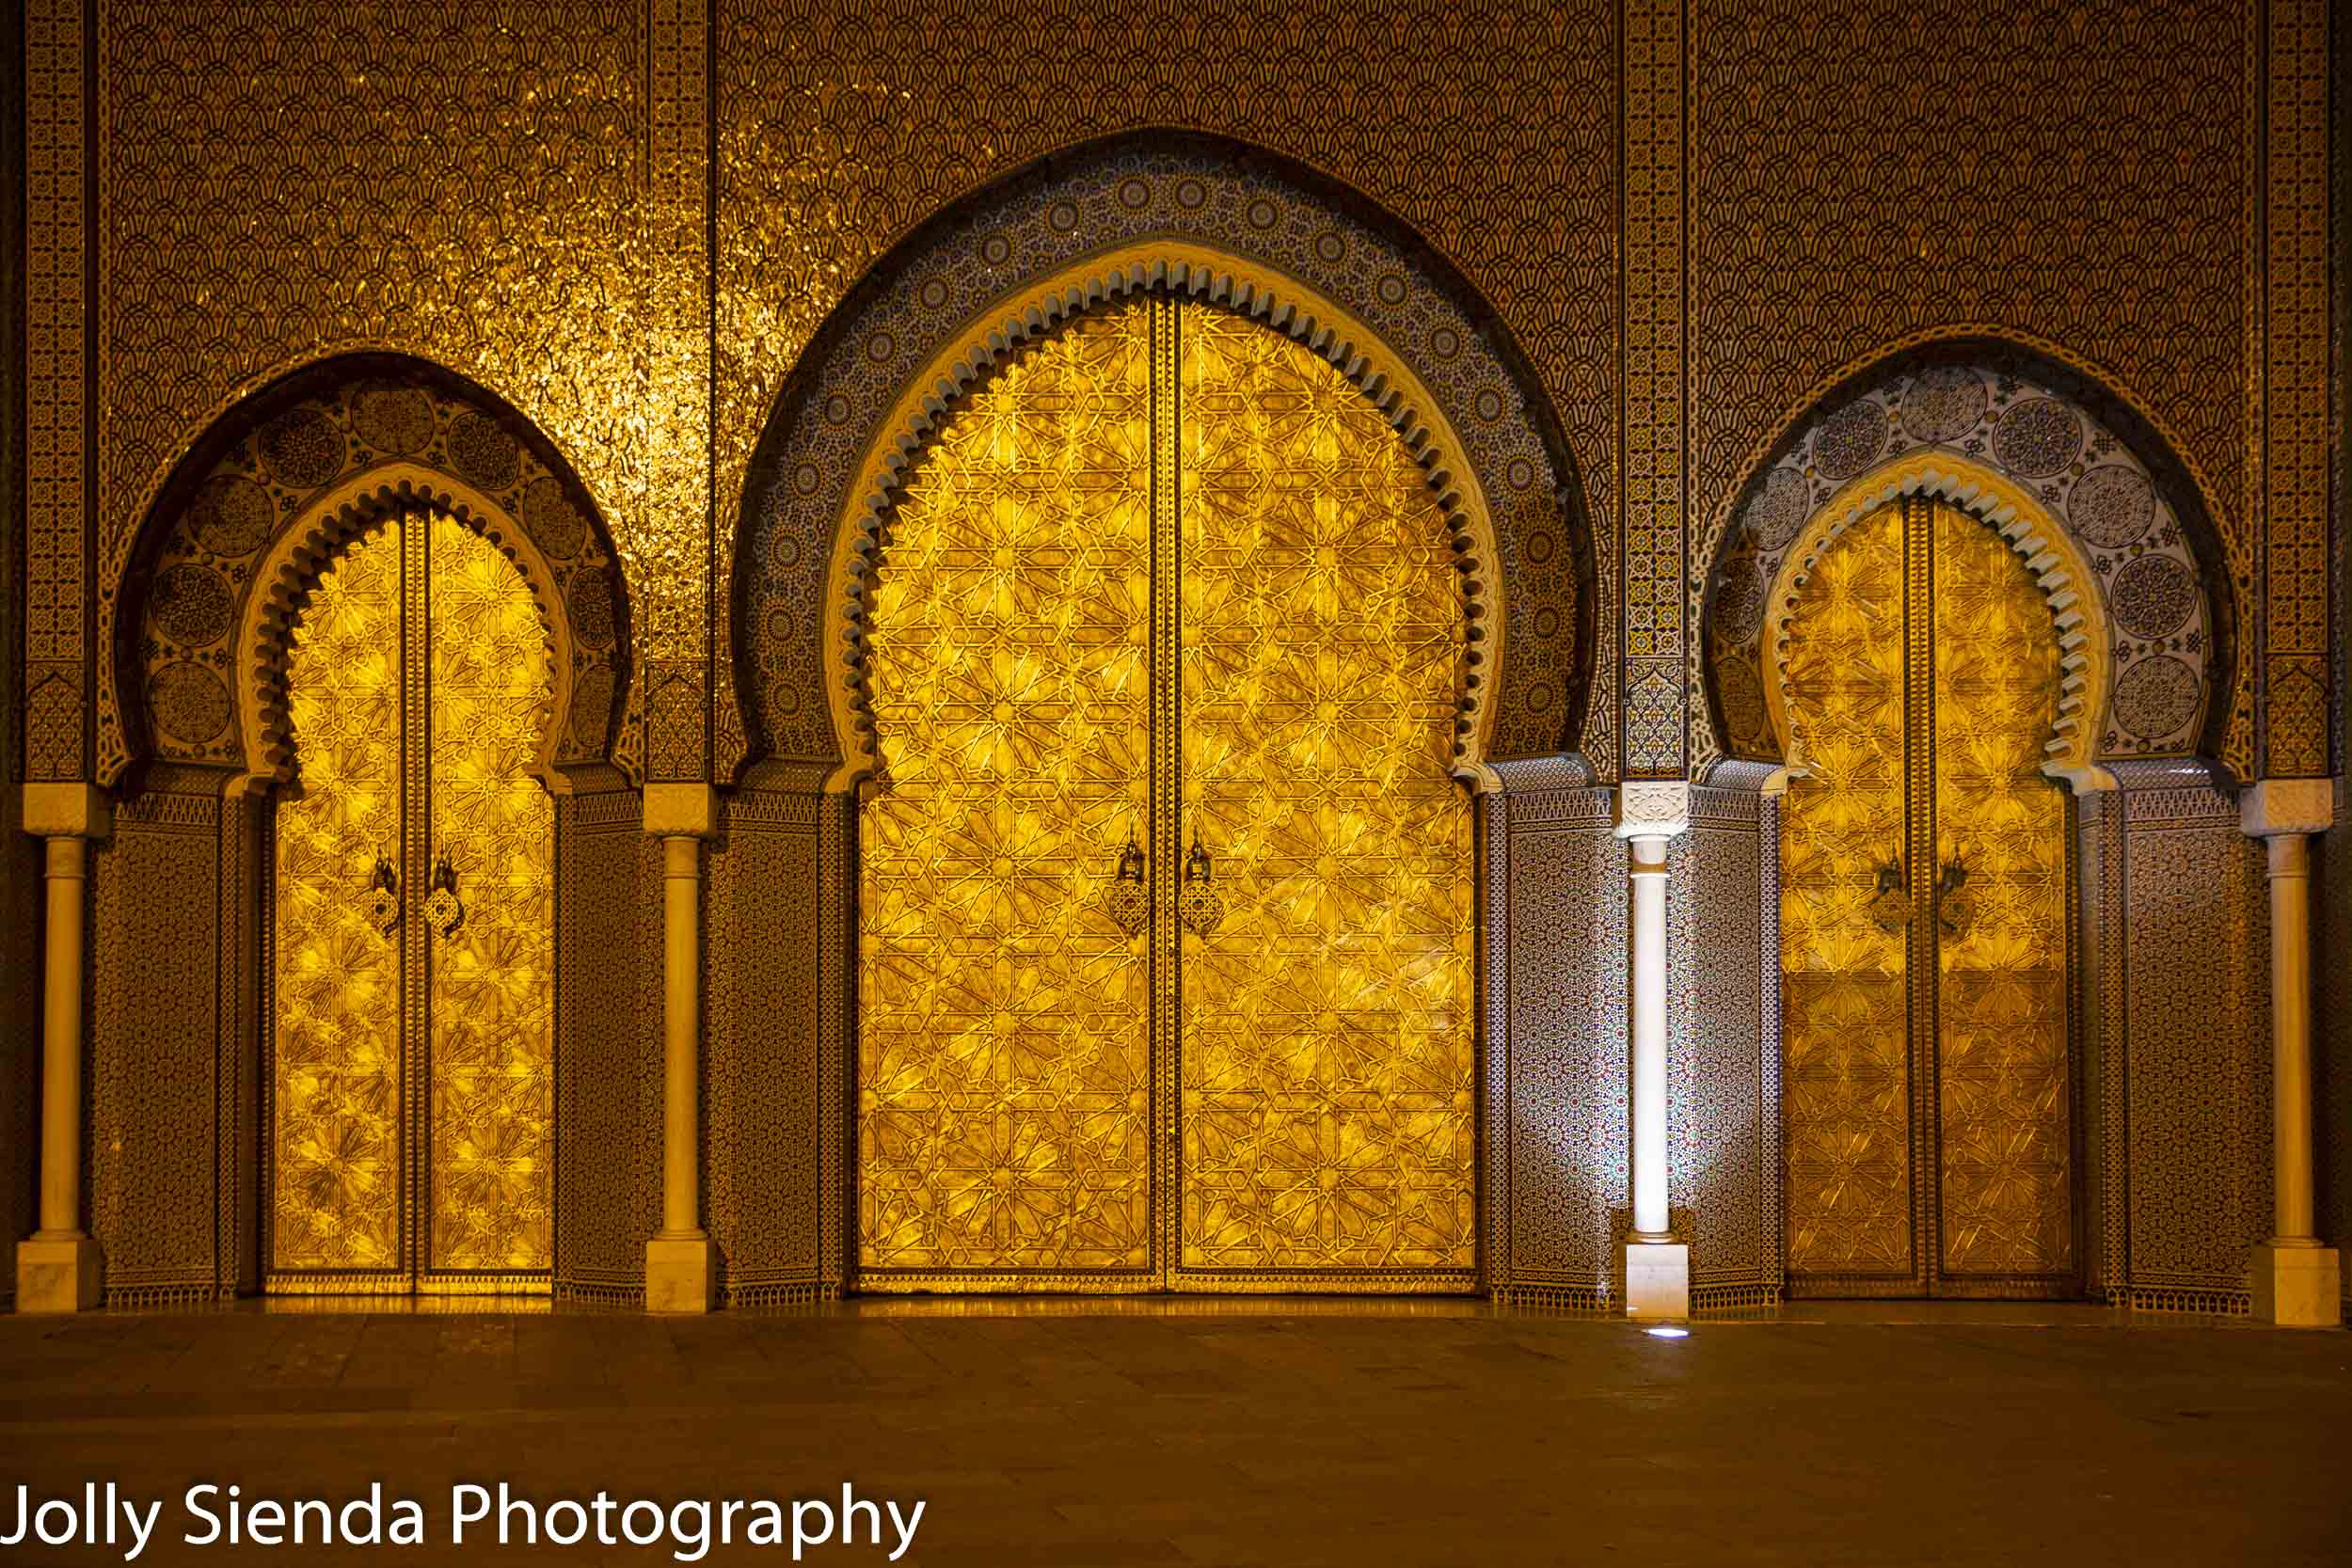 Golden doors to the Royal Palace of Fez